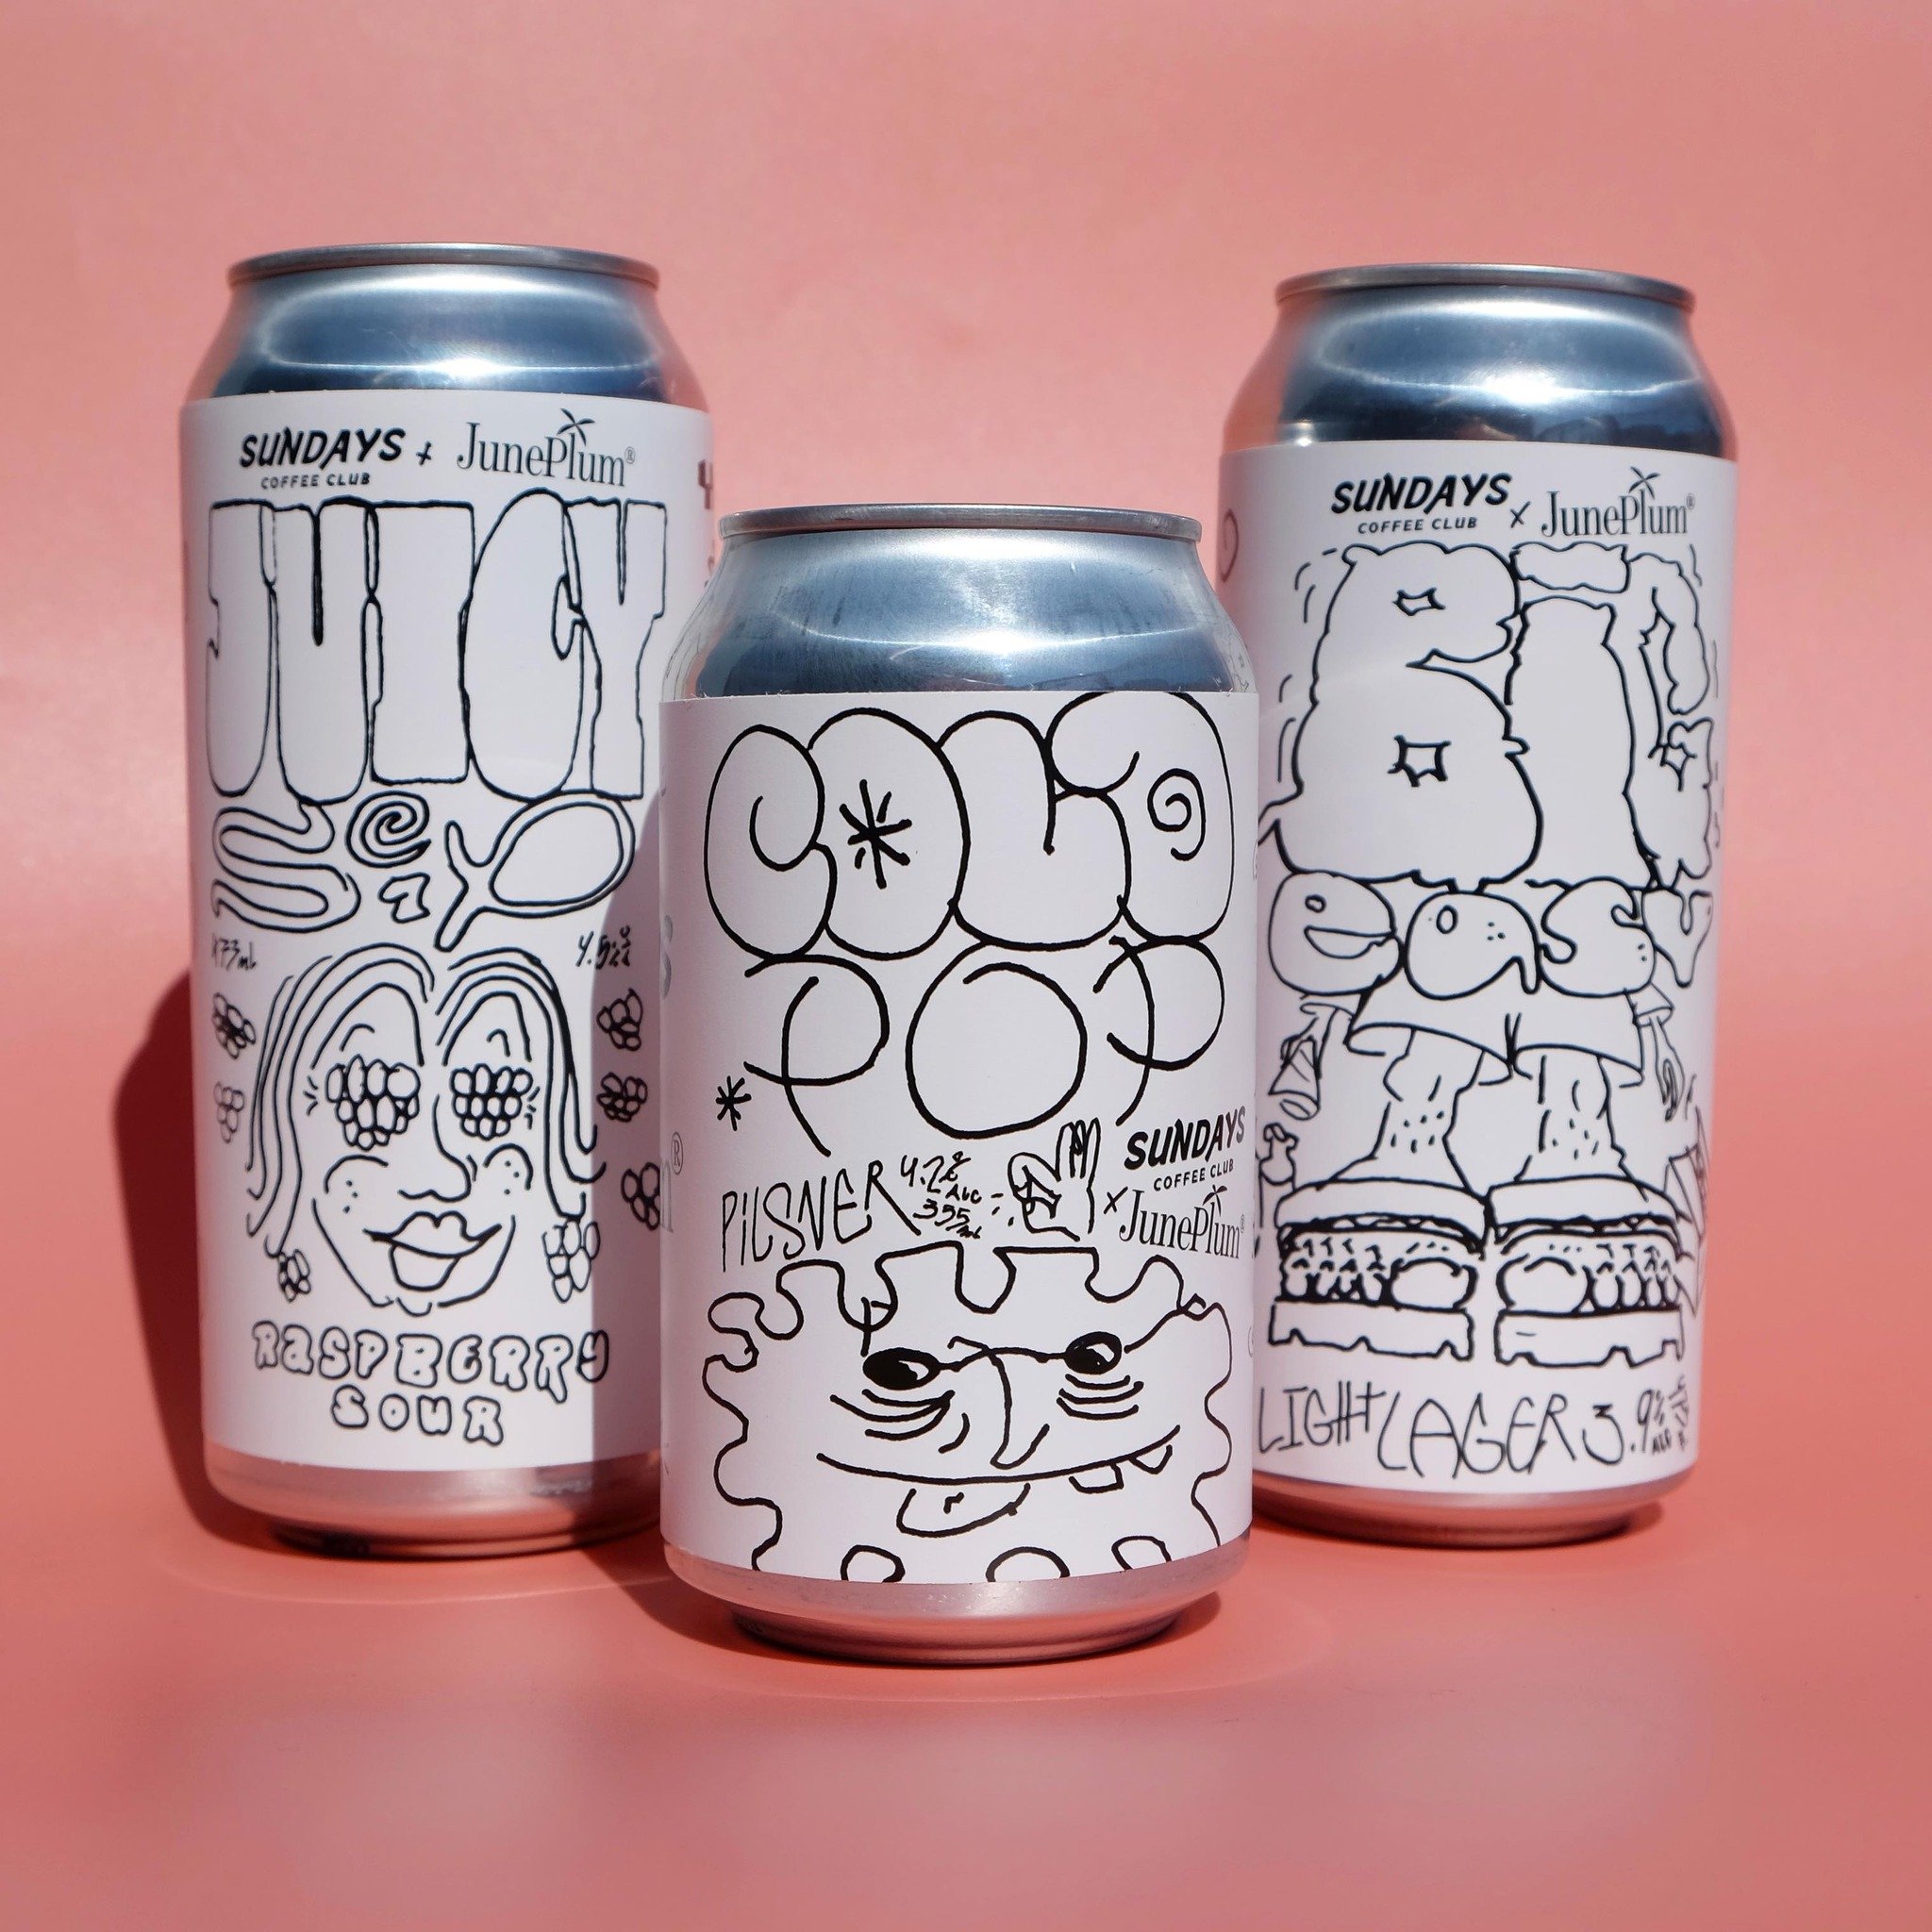 Now in shop AND at the ISO Caf&eacute;

JunePlum x @sundayscoffee.club collab BEER

🧃Juicy Sip// raspberry sour
❄️Cold Pop // classic pilsner
⭐️Big Easy // light lager 

✍️Label art by @no______e